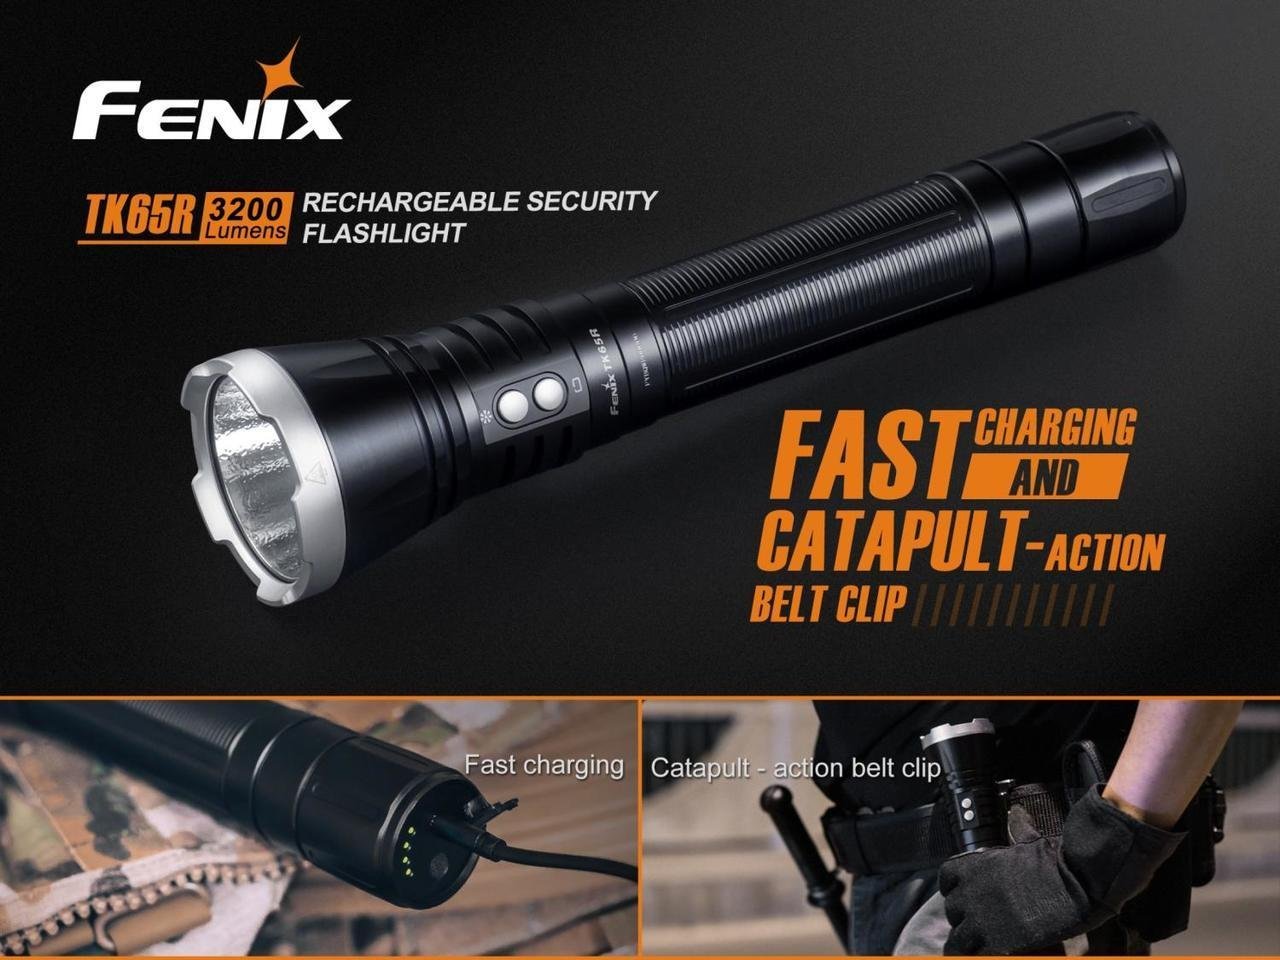 FENIX TK65R USB Rechargeable 3200 Lumen Cree LED Police Flashlight with, 5000mAh rechargeable battery, Belt clip and EdisonBright USB charging cable bundle - image 2 of 6